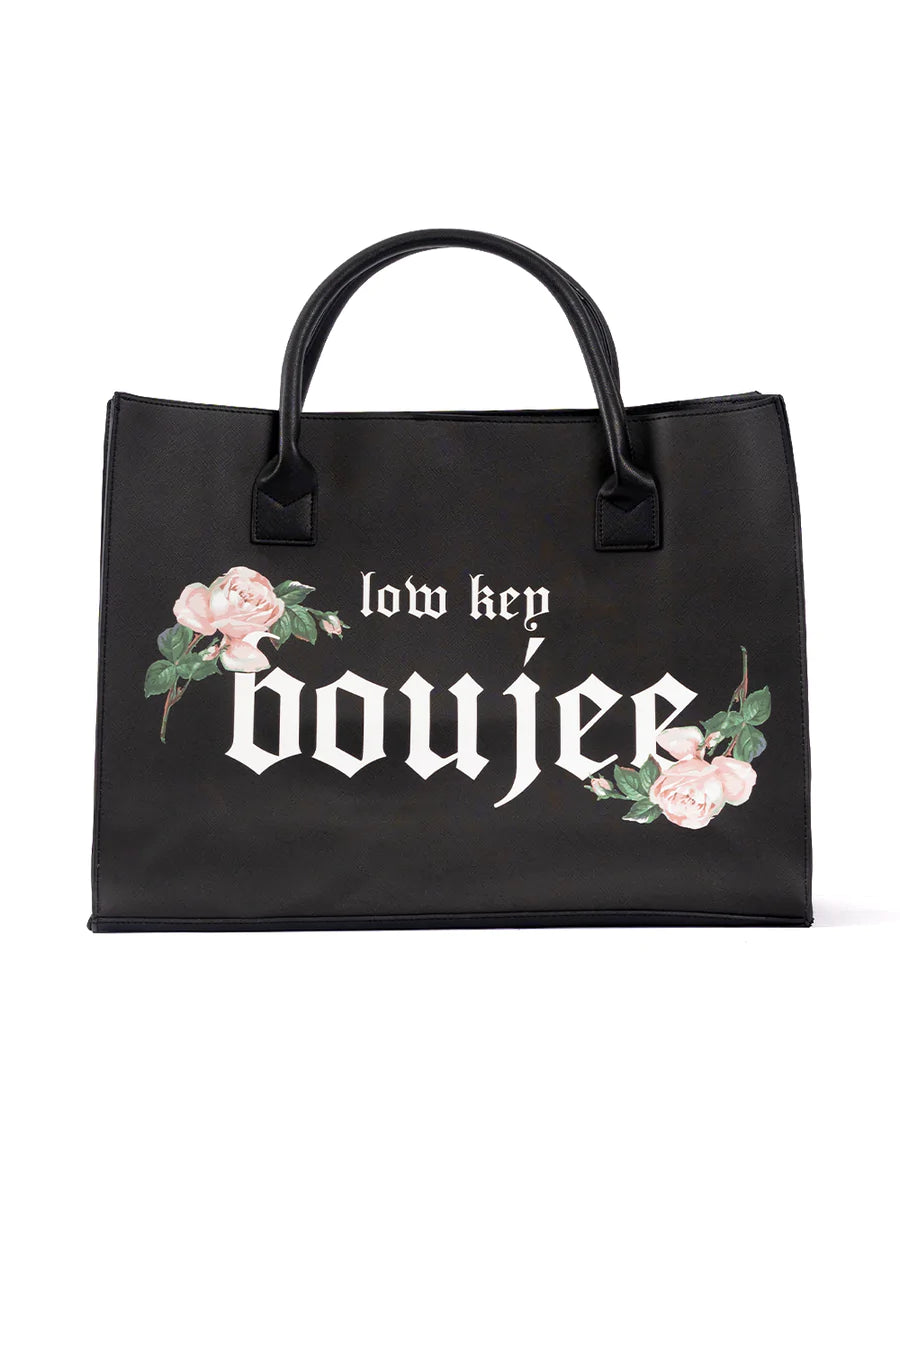 Boujee Modern Vegan Tote with Scarf